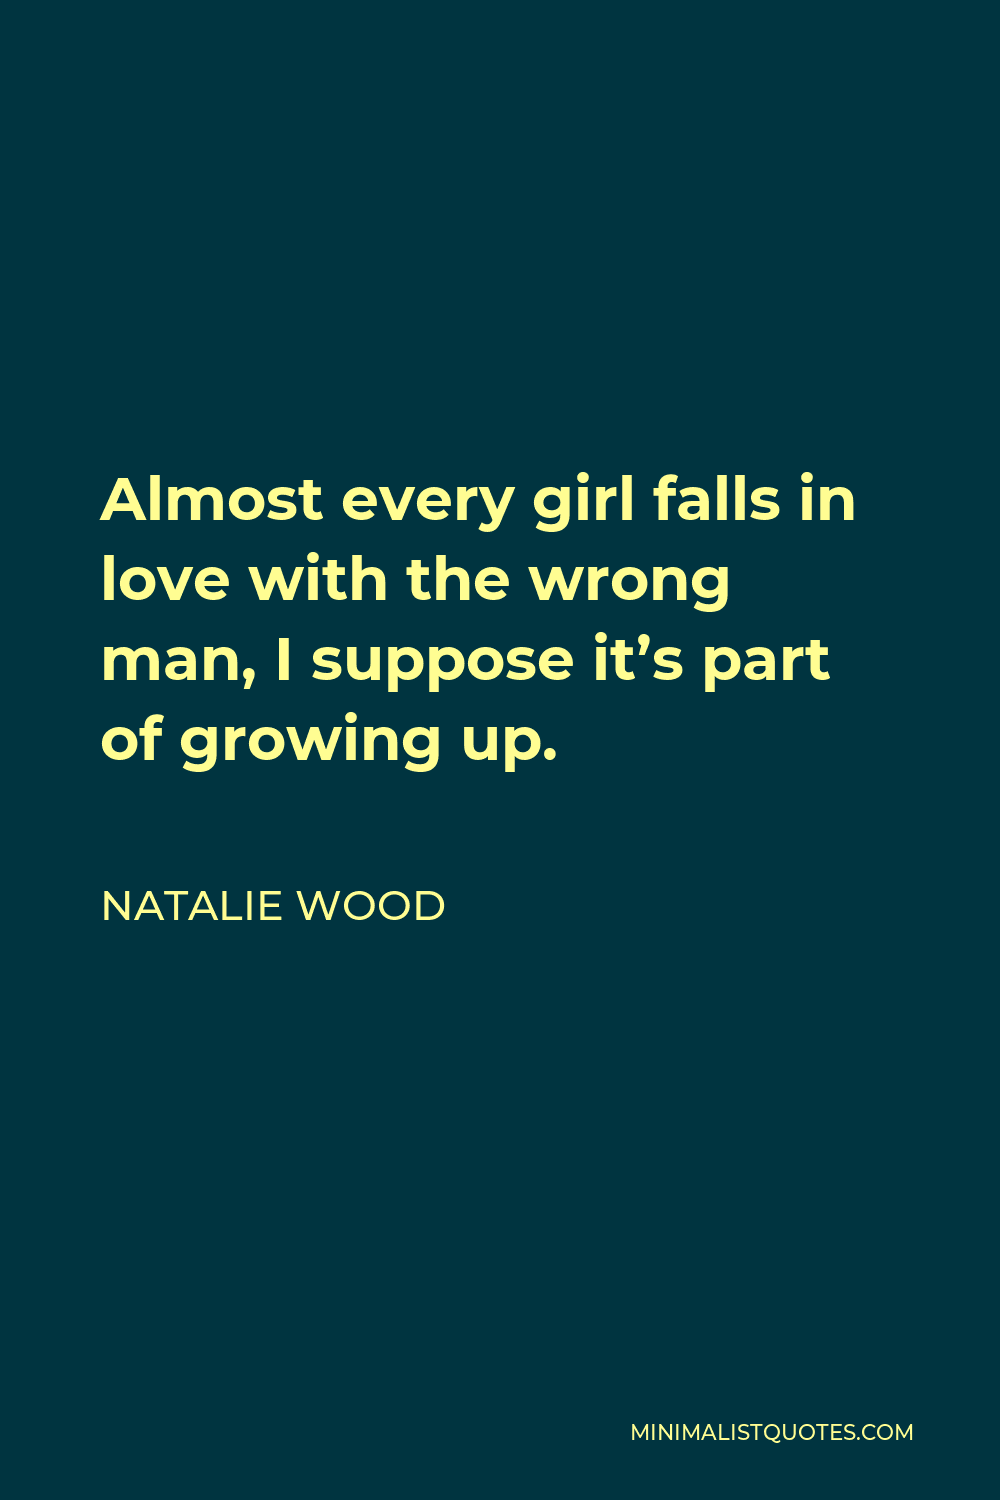 Natalie Wood Quote - Almost every girl falls in love with the wrong man, I suppose it’s part of growing up.